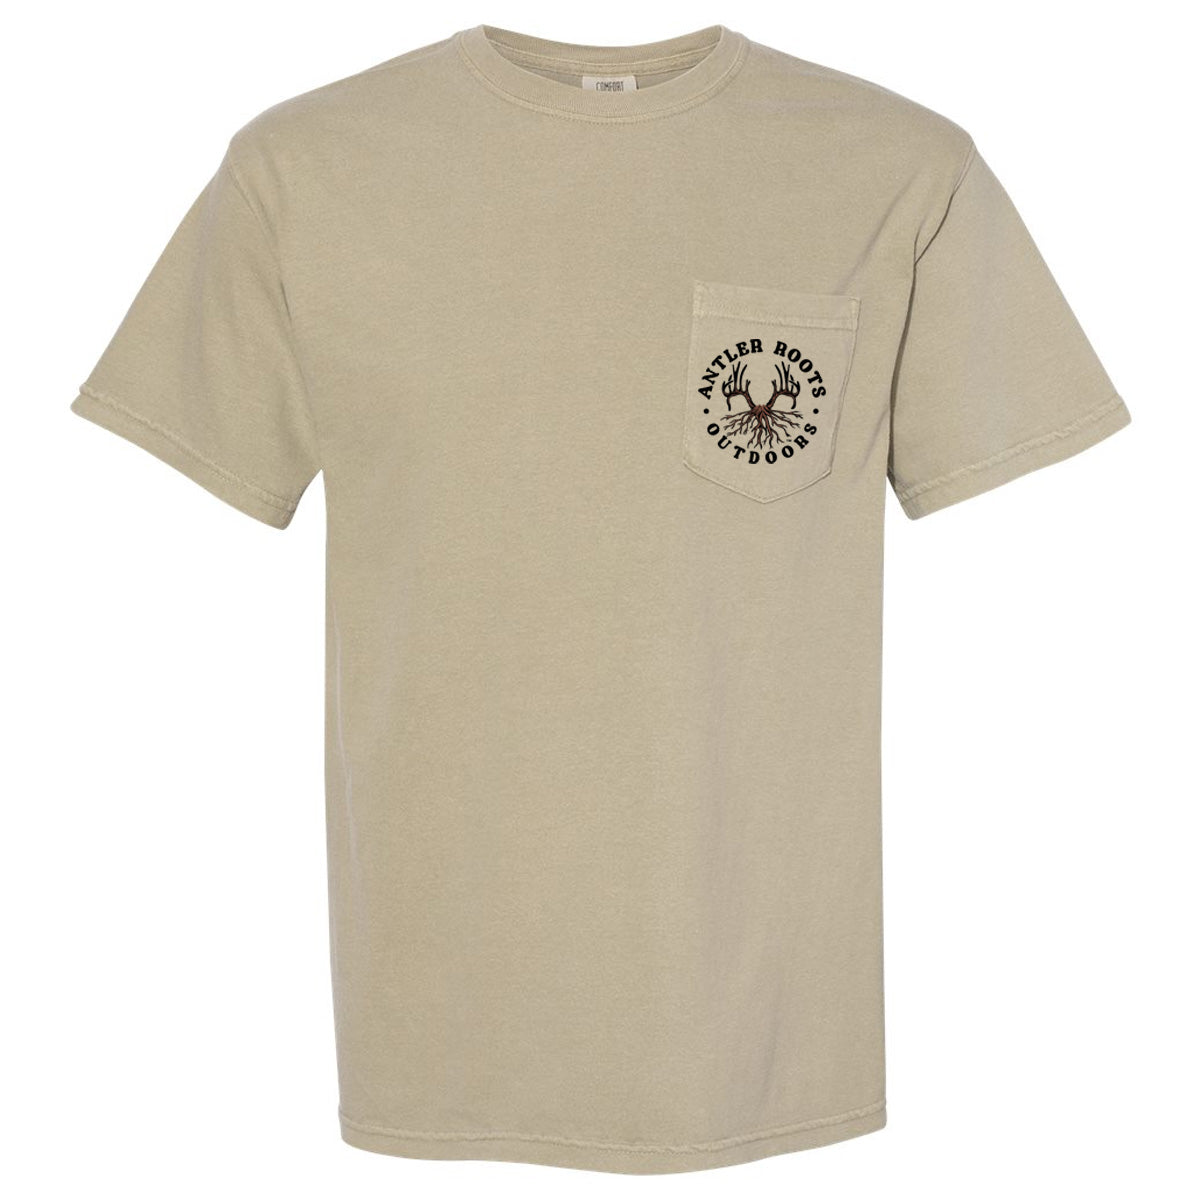 Antler Roots - Original Logo with Sunset - Comfort Color - Khaki Short/Long Sleeves - Southern Grace Creations